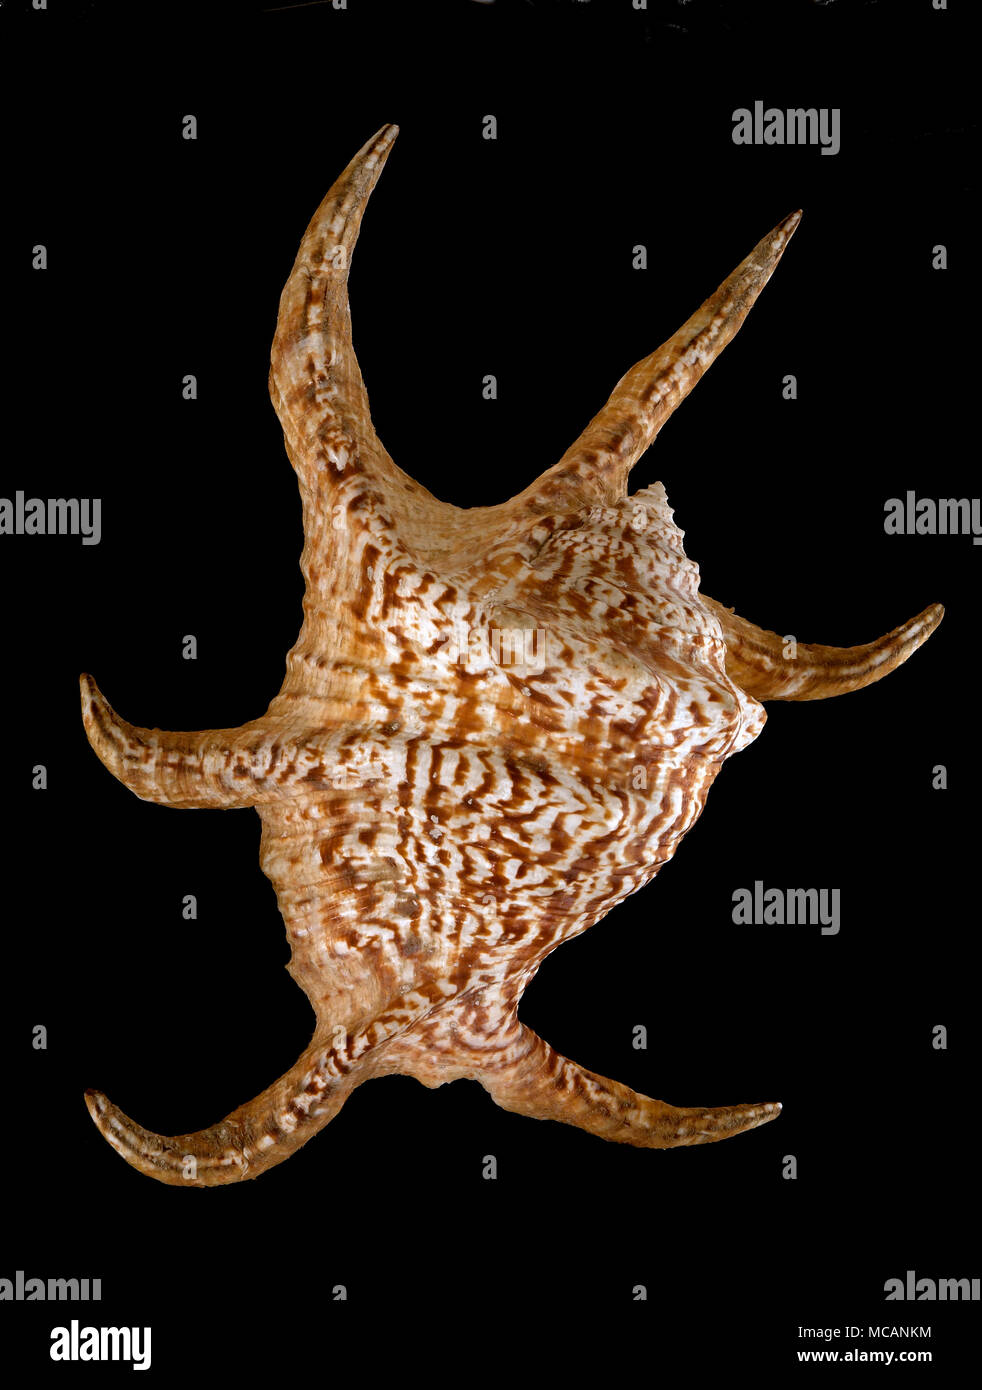 Seashell of Chiragra Spider Conch (Harpago chiragra or Lambis chiragra), Malacology collection, Spain, Europe Stock Photo